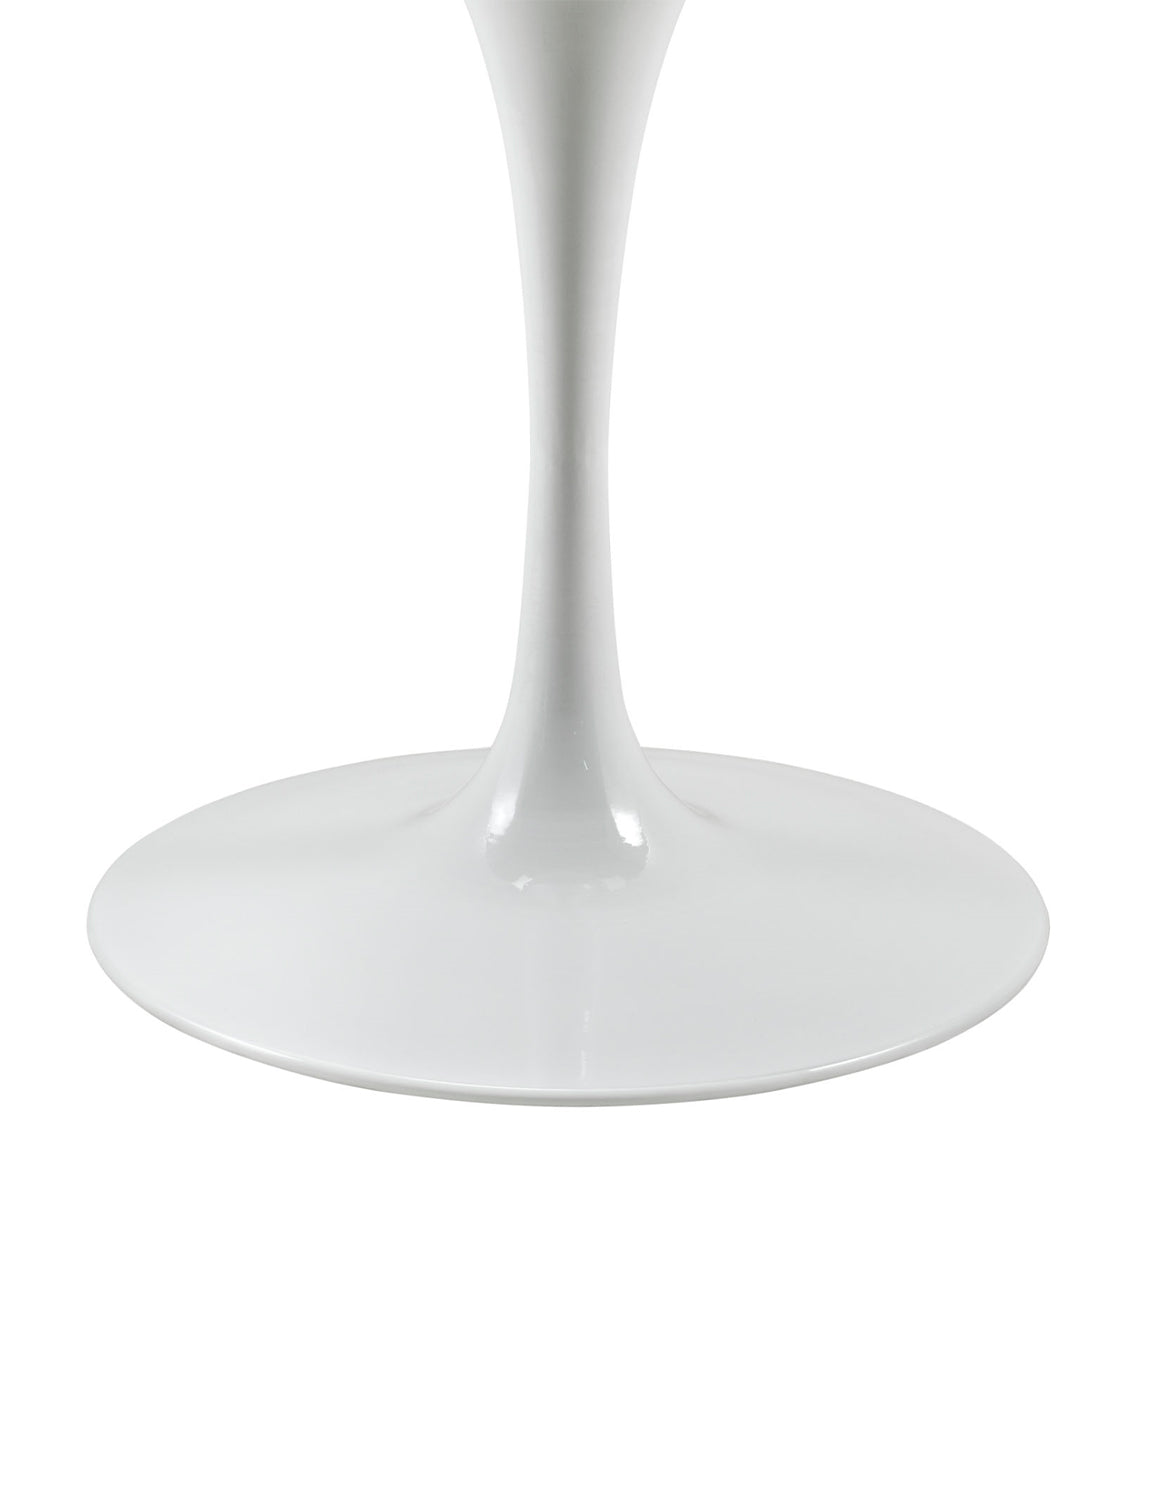 Lily Round Marble Dining Table, white base